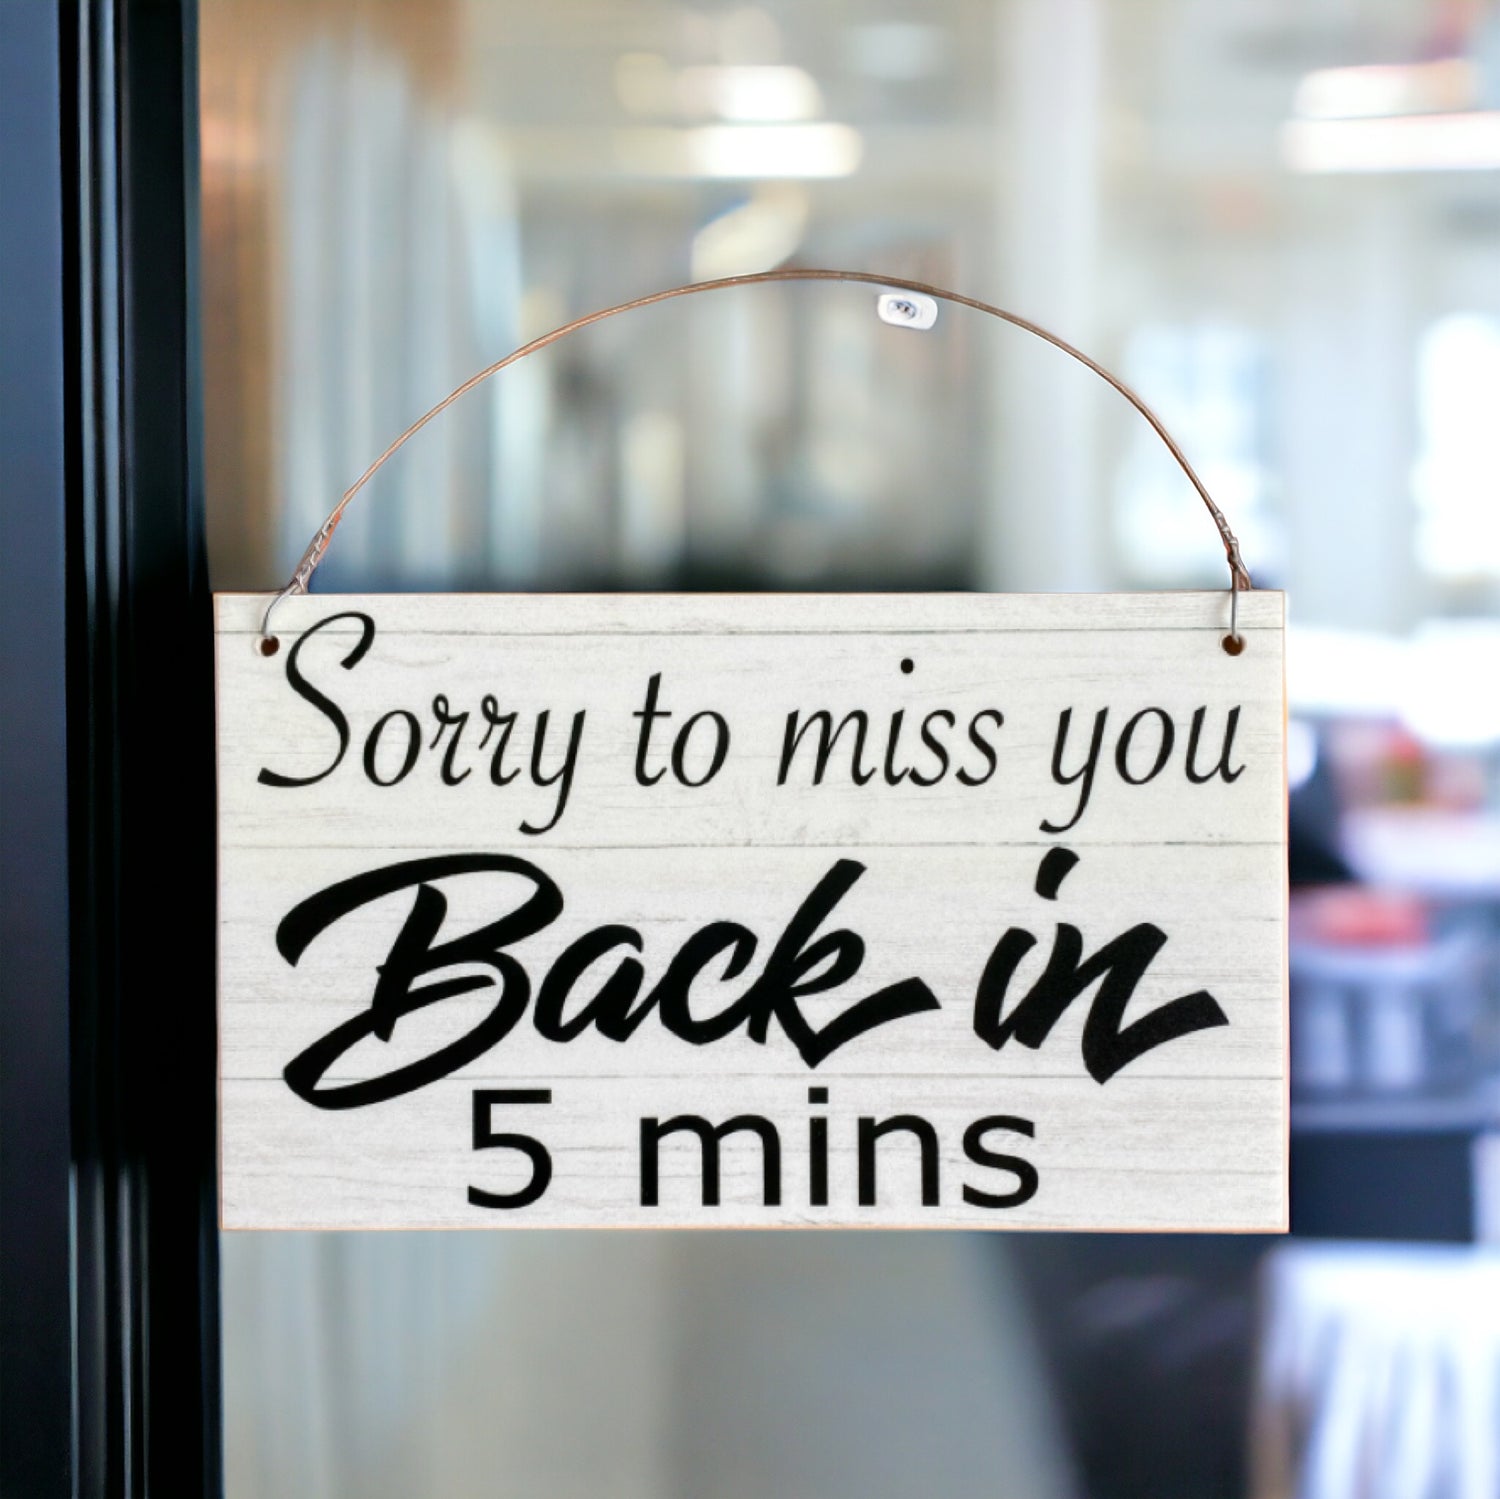 Sorry To Miss You Back In 5 Mins Business Shop Staff Sign - The Renmy Store Homewares & Gifts 